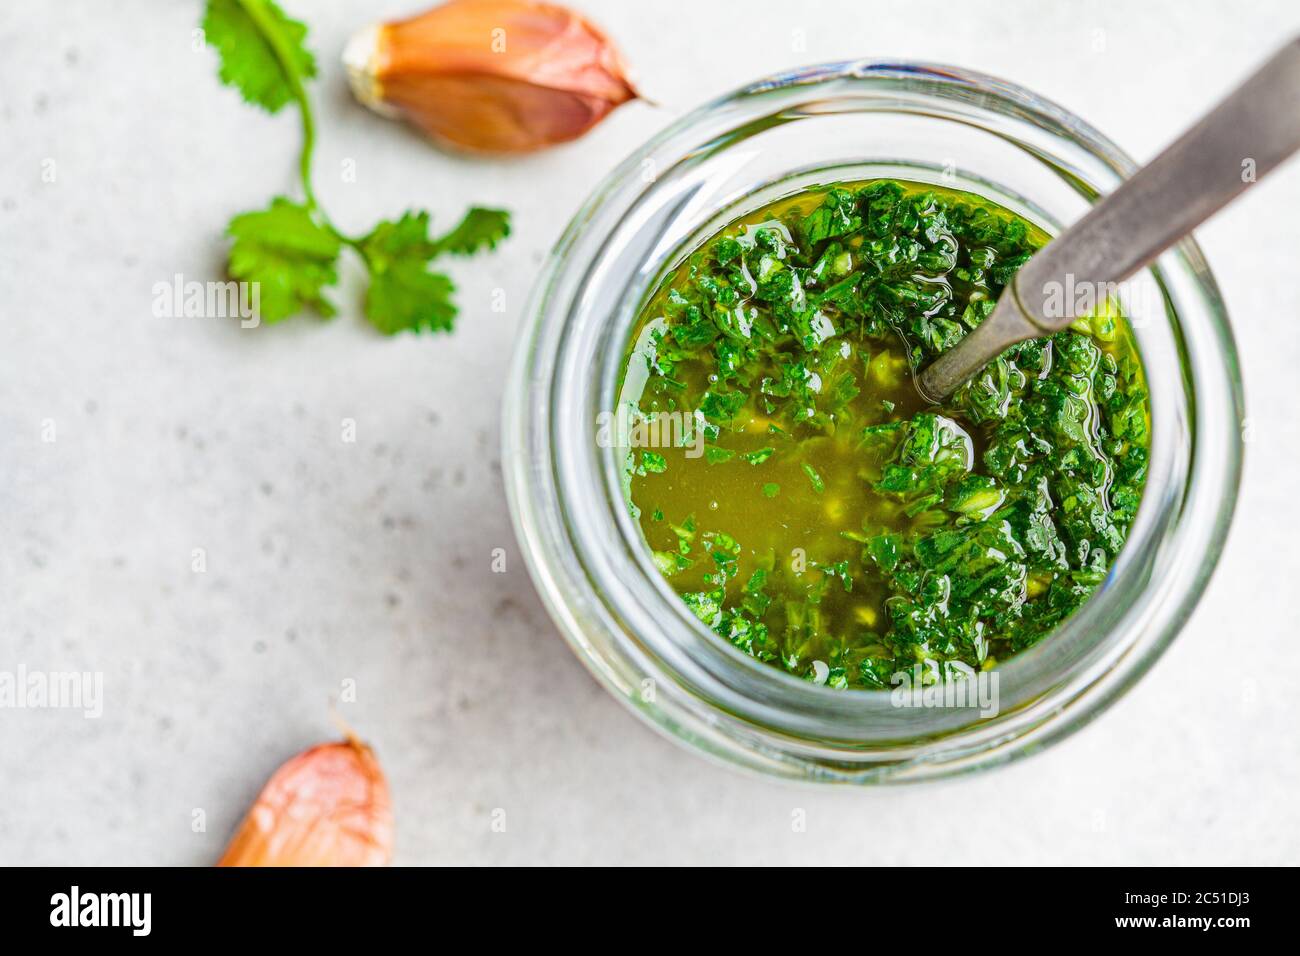 Fresh traditional chimichurri sauce for barbecue meat in a glass jar, light background. Stock Photo